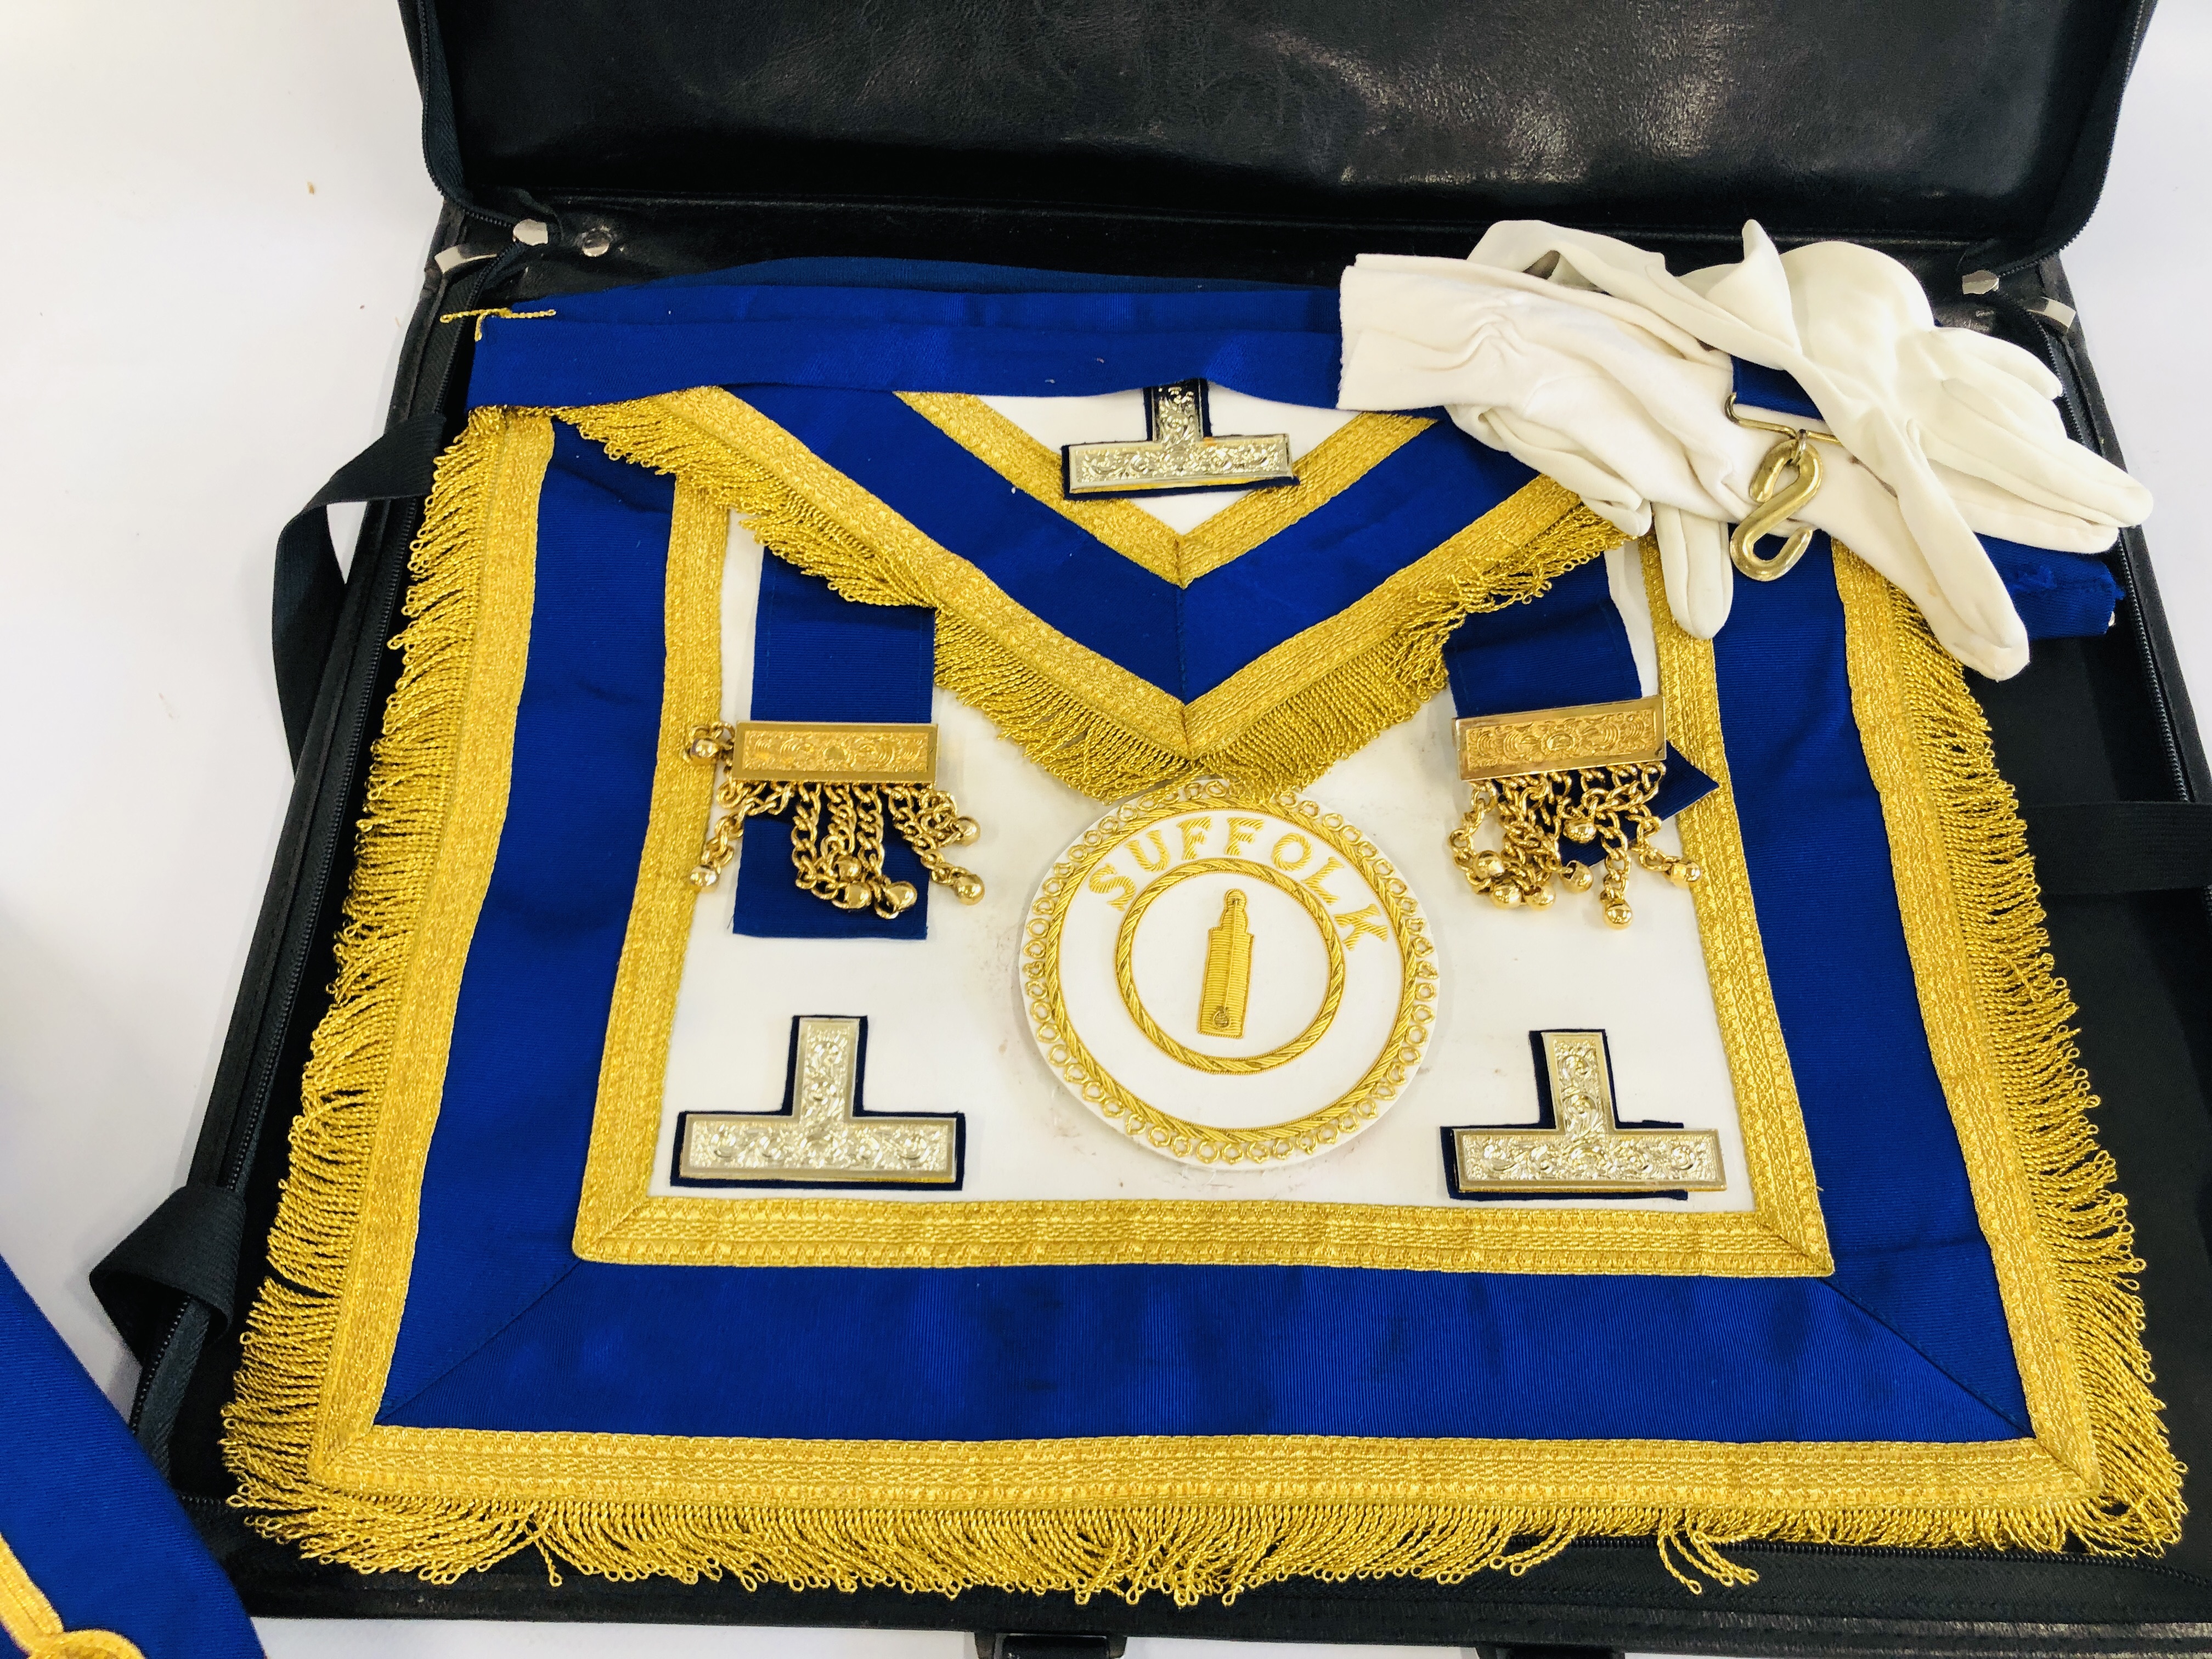 A GROUP OF "SUFFOLK" MASONIC REGALIA IN CARRY CASE. - Image 3 of 4